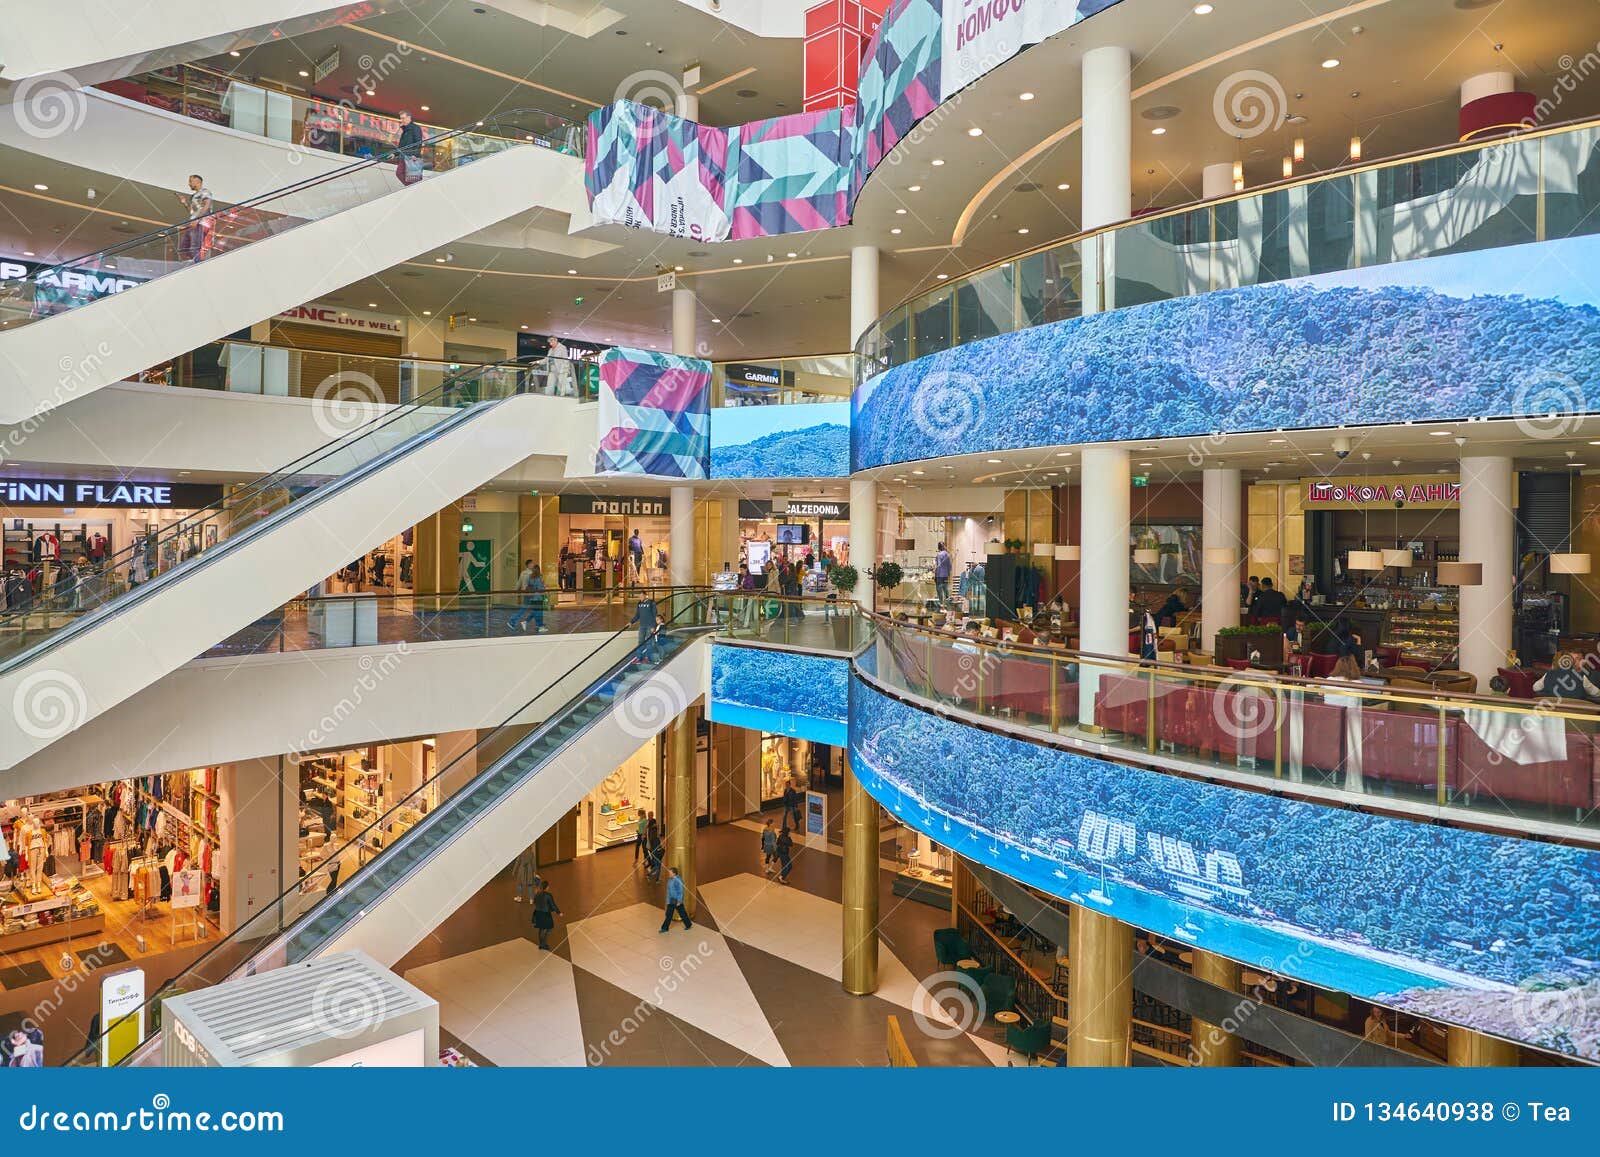 Galeria shopping center editorial stock photo. Image of mall - 134640938